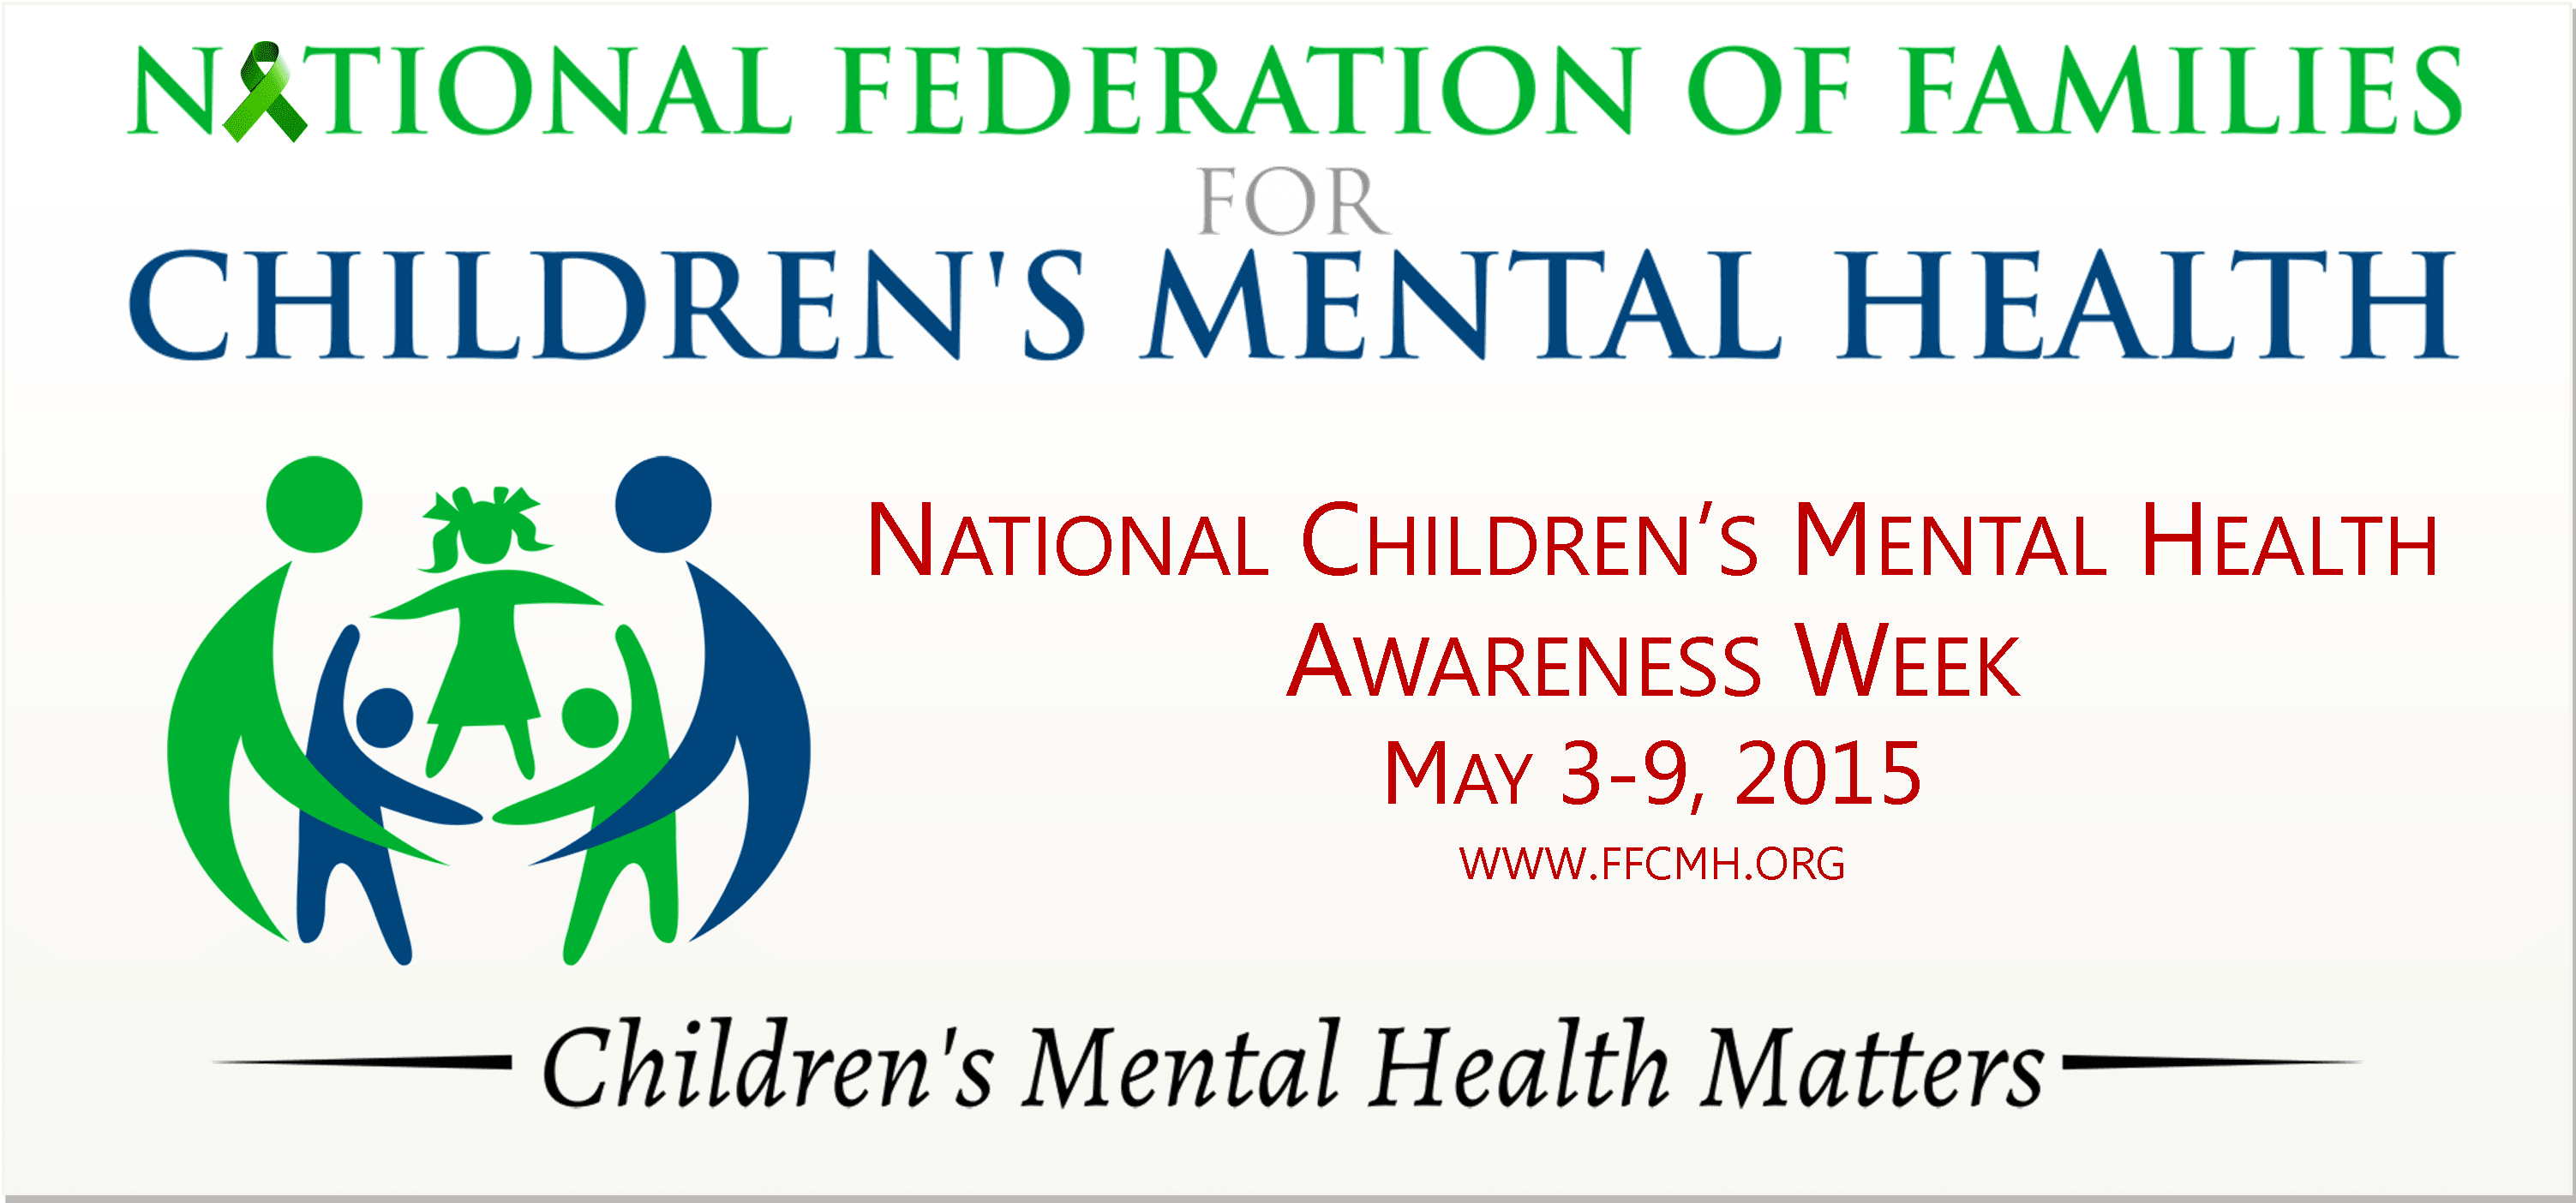 National Federation of Families for Children's Mental Health